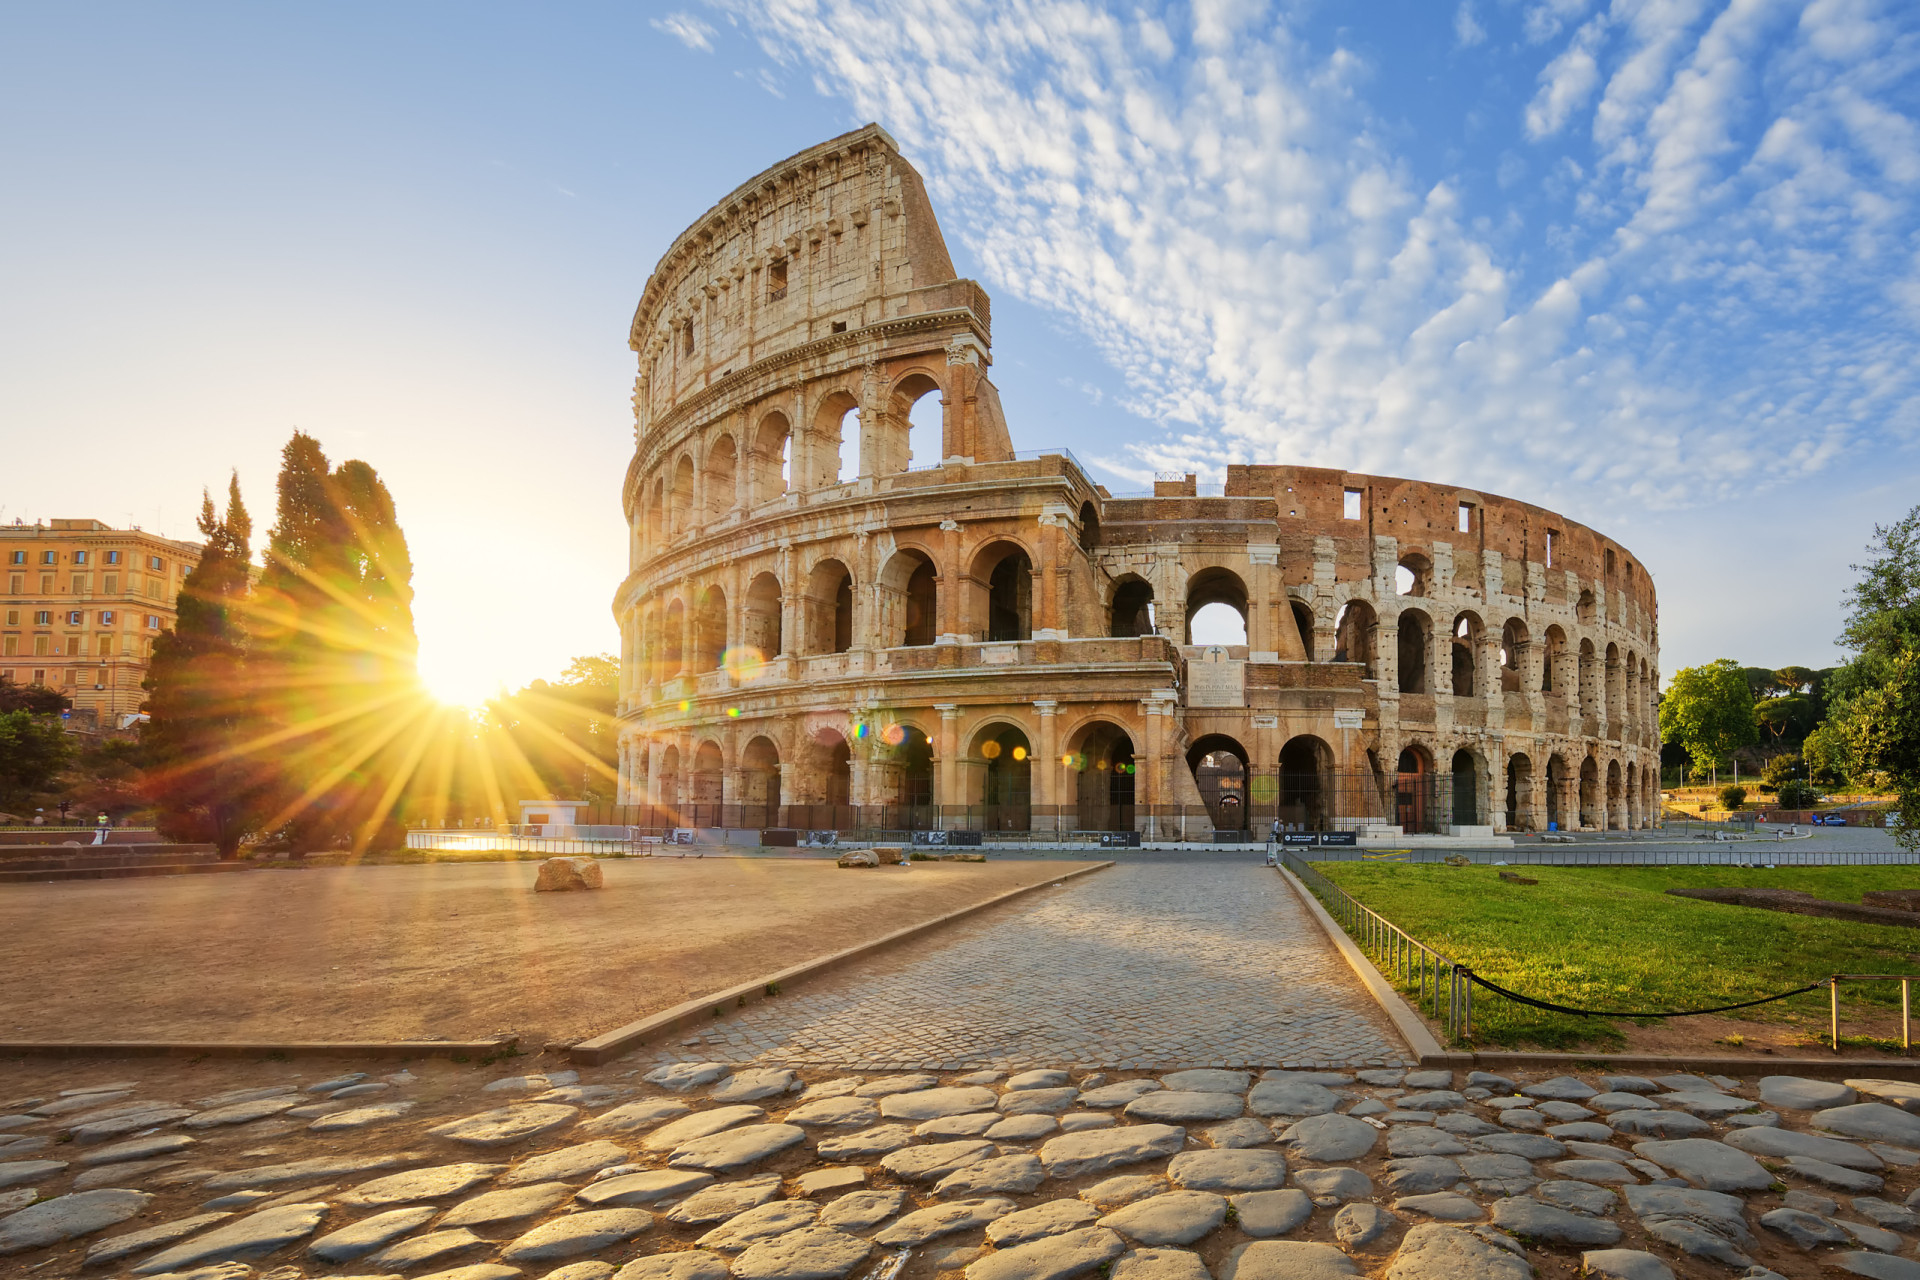 <p>Explore the ancient ruins, visit Vatican City, and enjoy delicious Italian cuisine. A quintessential city of romance, Rome is an unforgettable destination for lovers.</p><p>You may also like:<a href="https://www.starsinsider.com/n/454714?utm_source=msn.com&utm_medium=display&utm_campaign=referral_description&utm_content=631135en-us"> Rich list celebrities who had ordinary jobs</a></p>